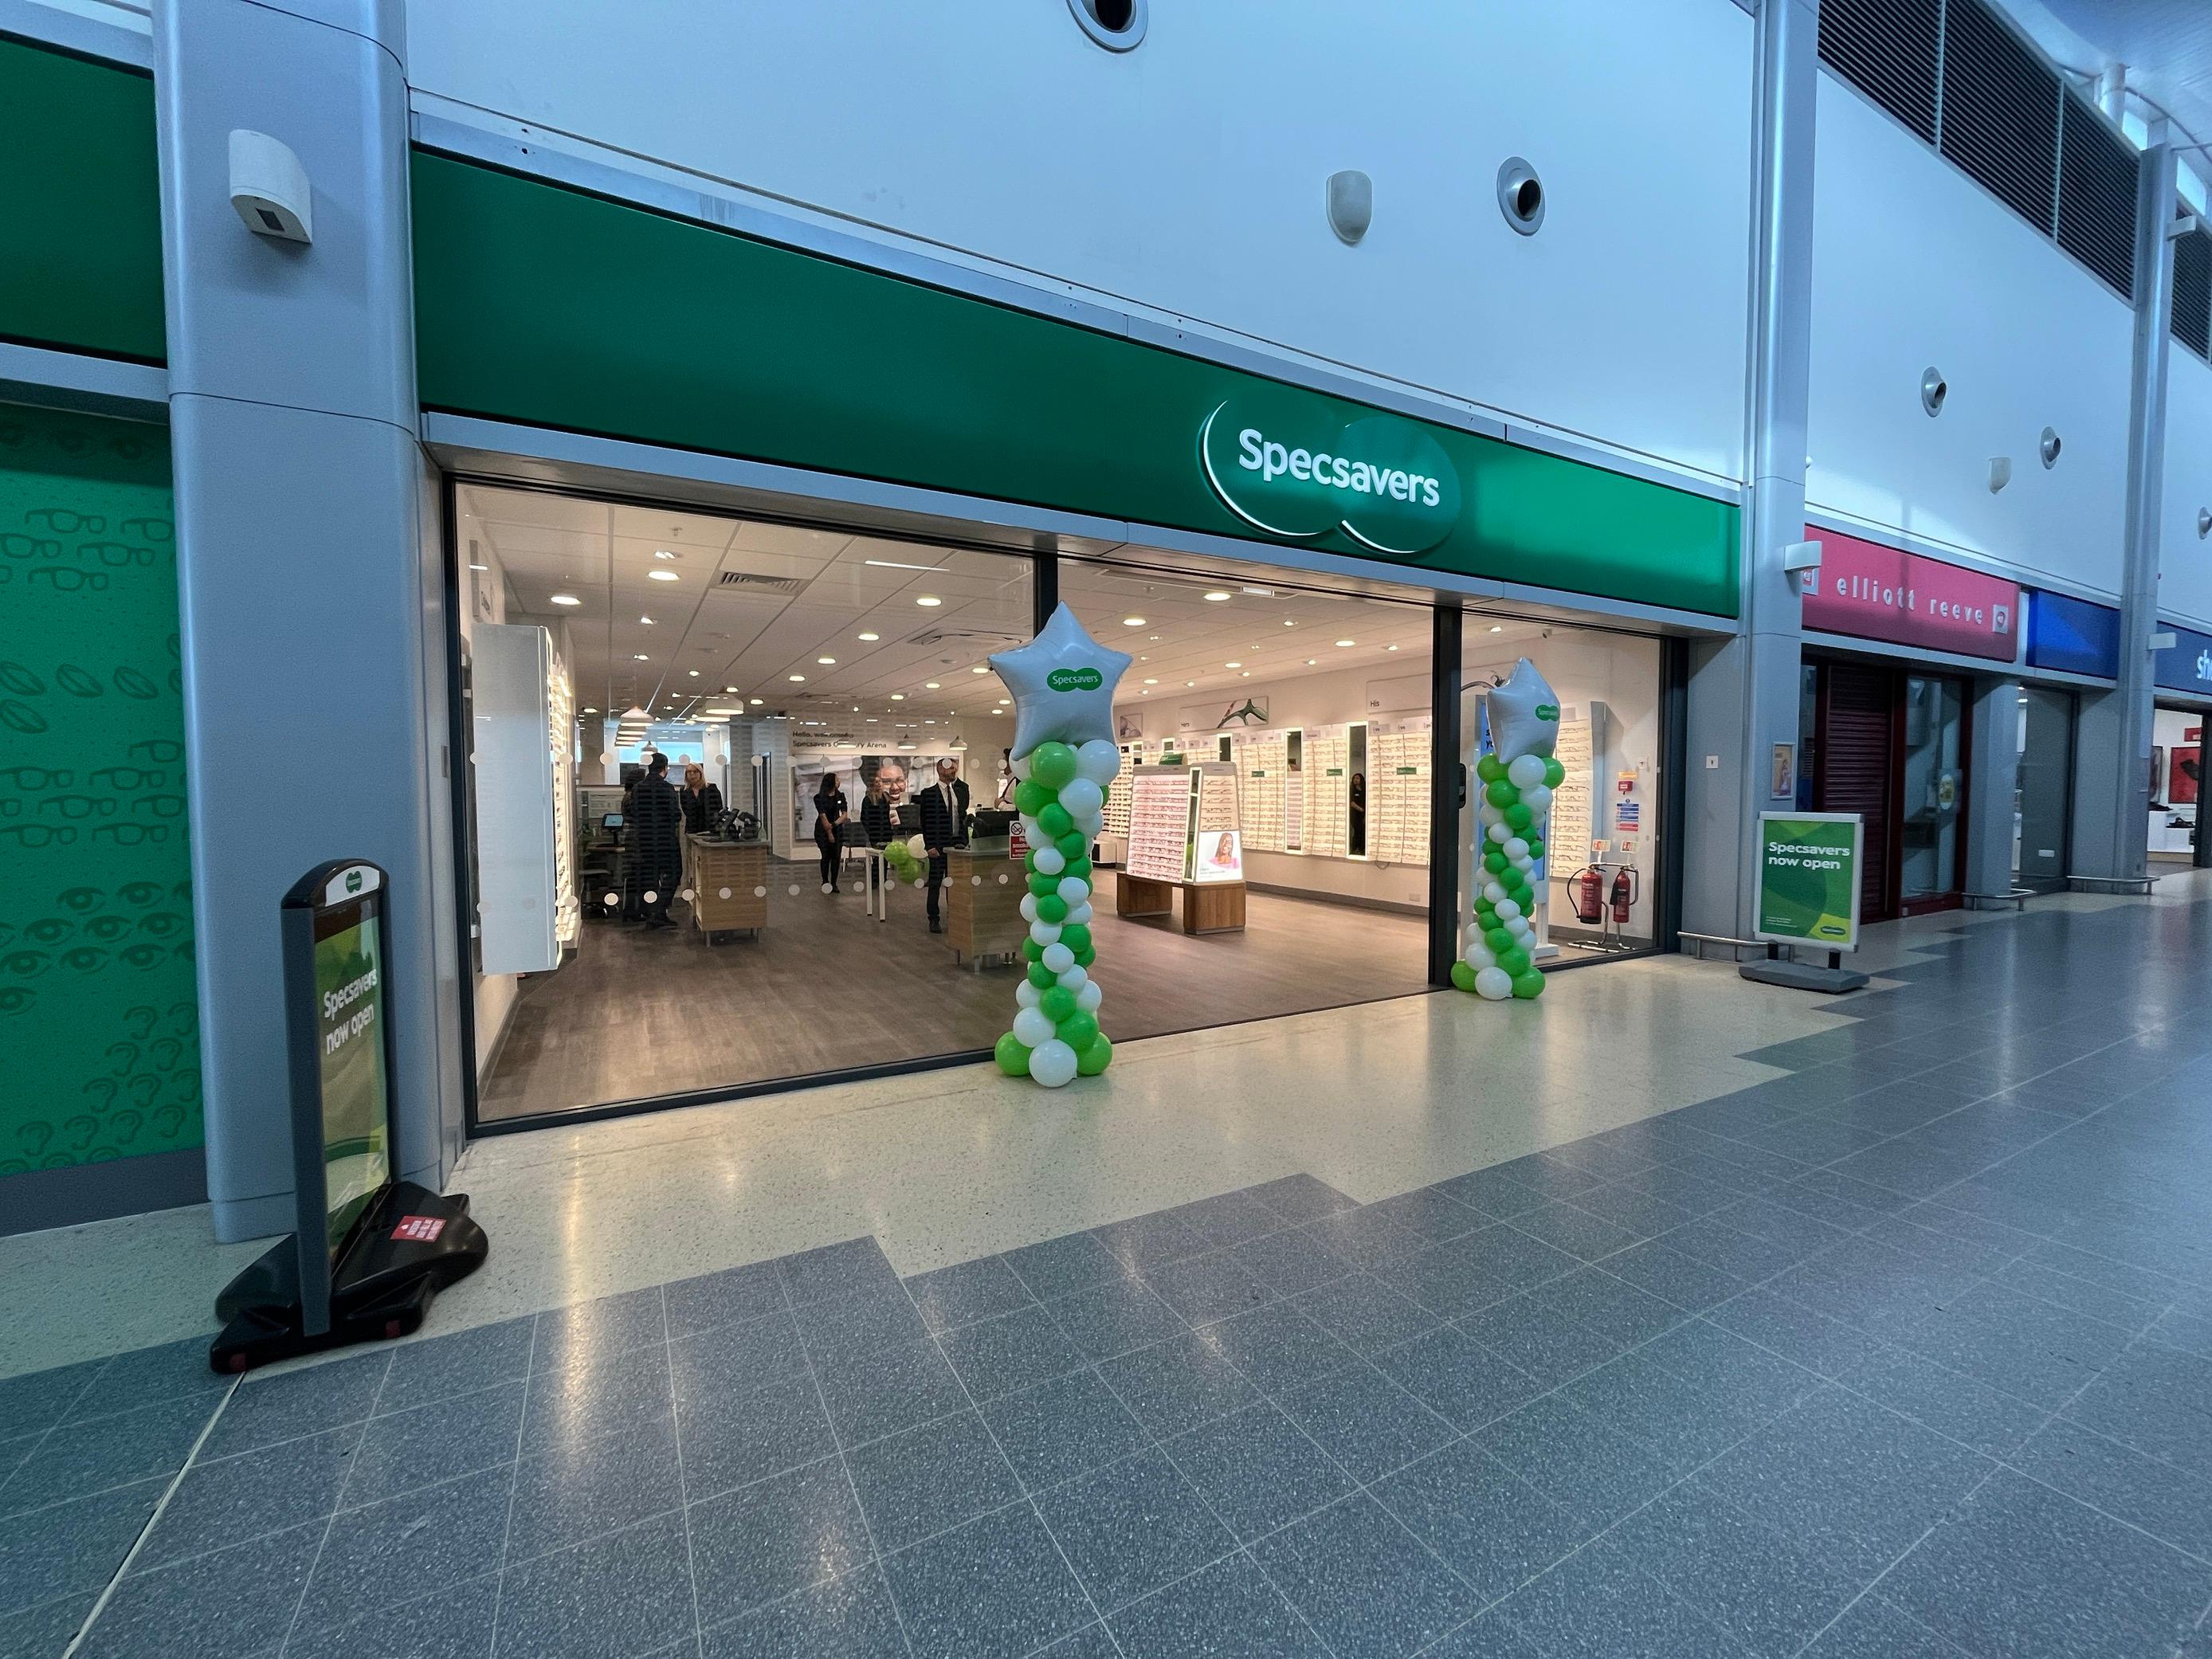 Images Specsavers Opticians and Audiologists - Coventry Arena